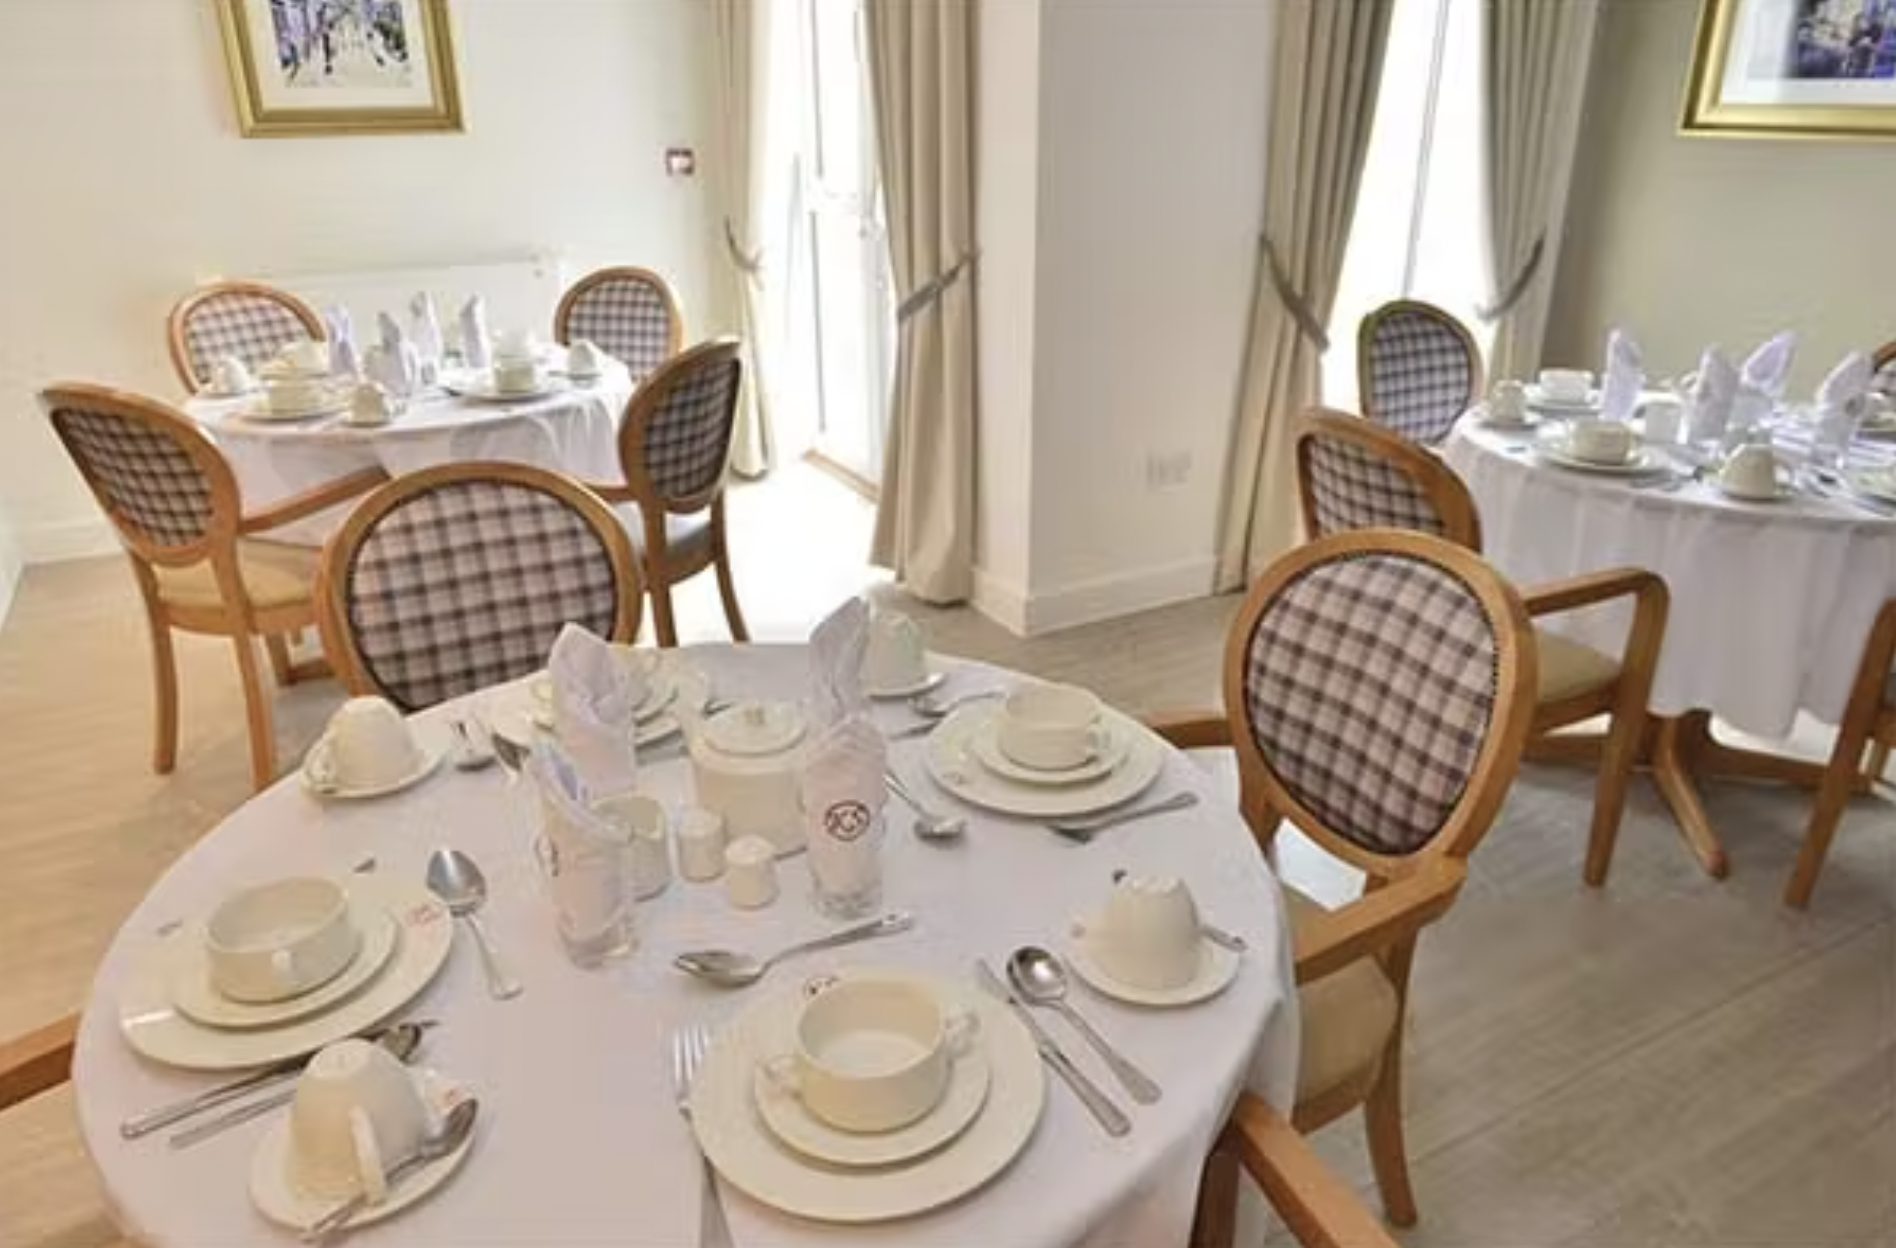 Independent Care Home - Kingsacre care home 9